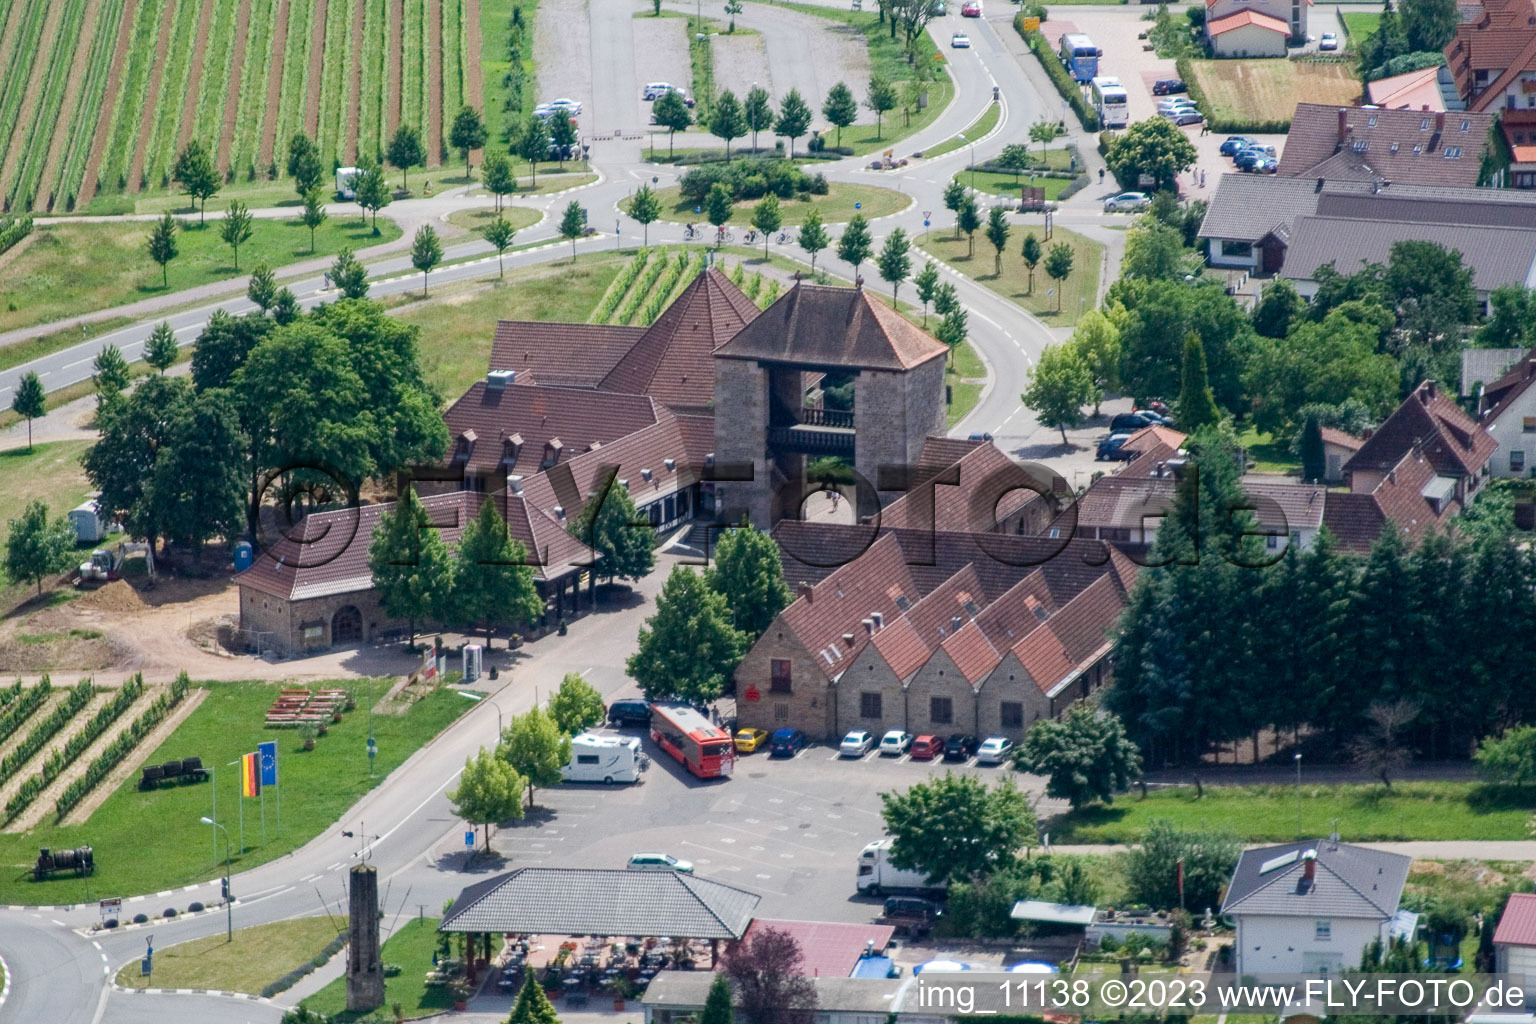 Aerial photograpy of Wine gate from the north in the district Rechtenbach in Schweigen-Rechtenbach in the state Rhineland-Palatinate, Germany